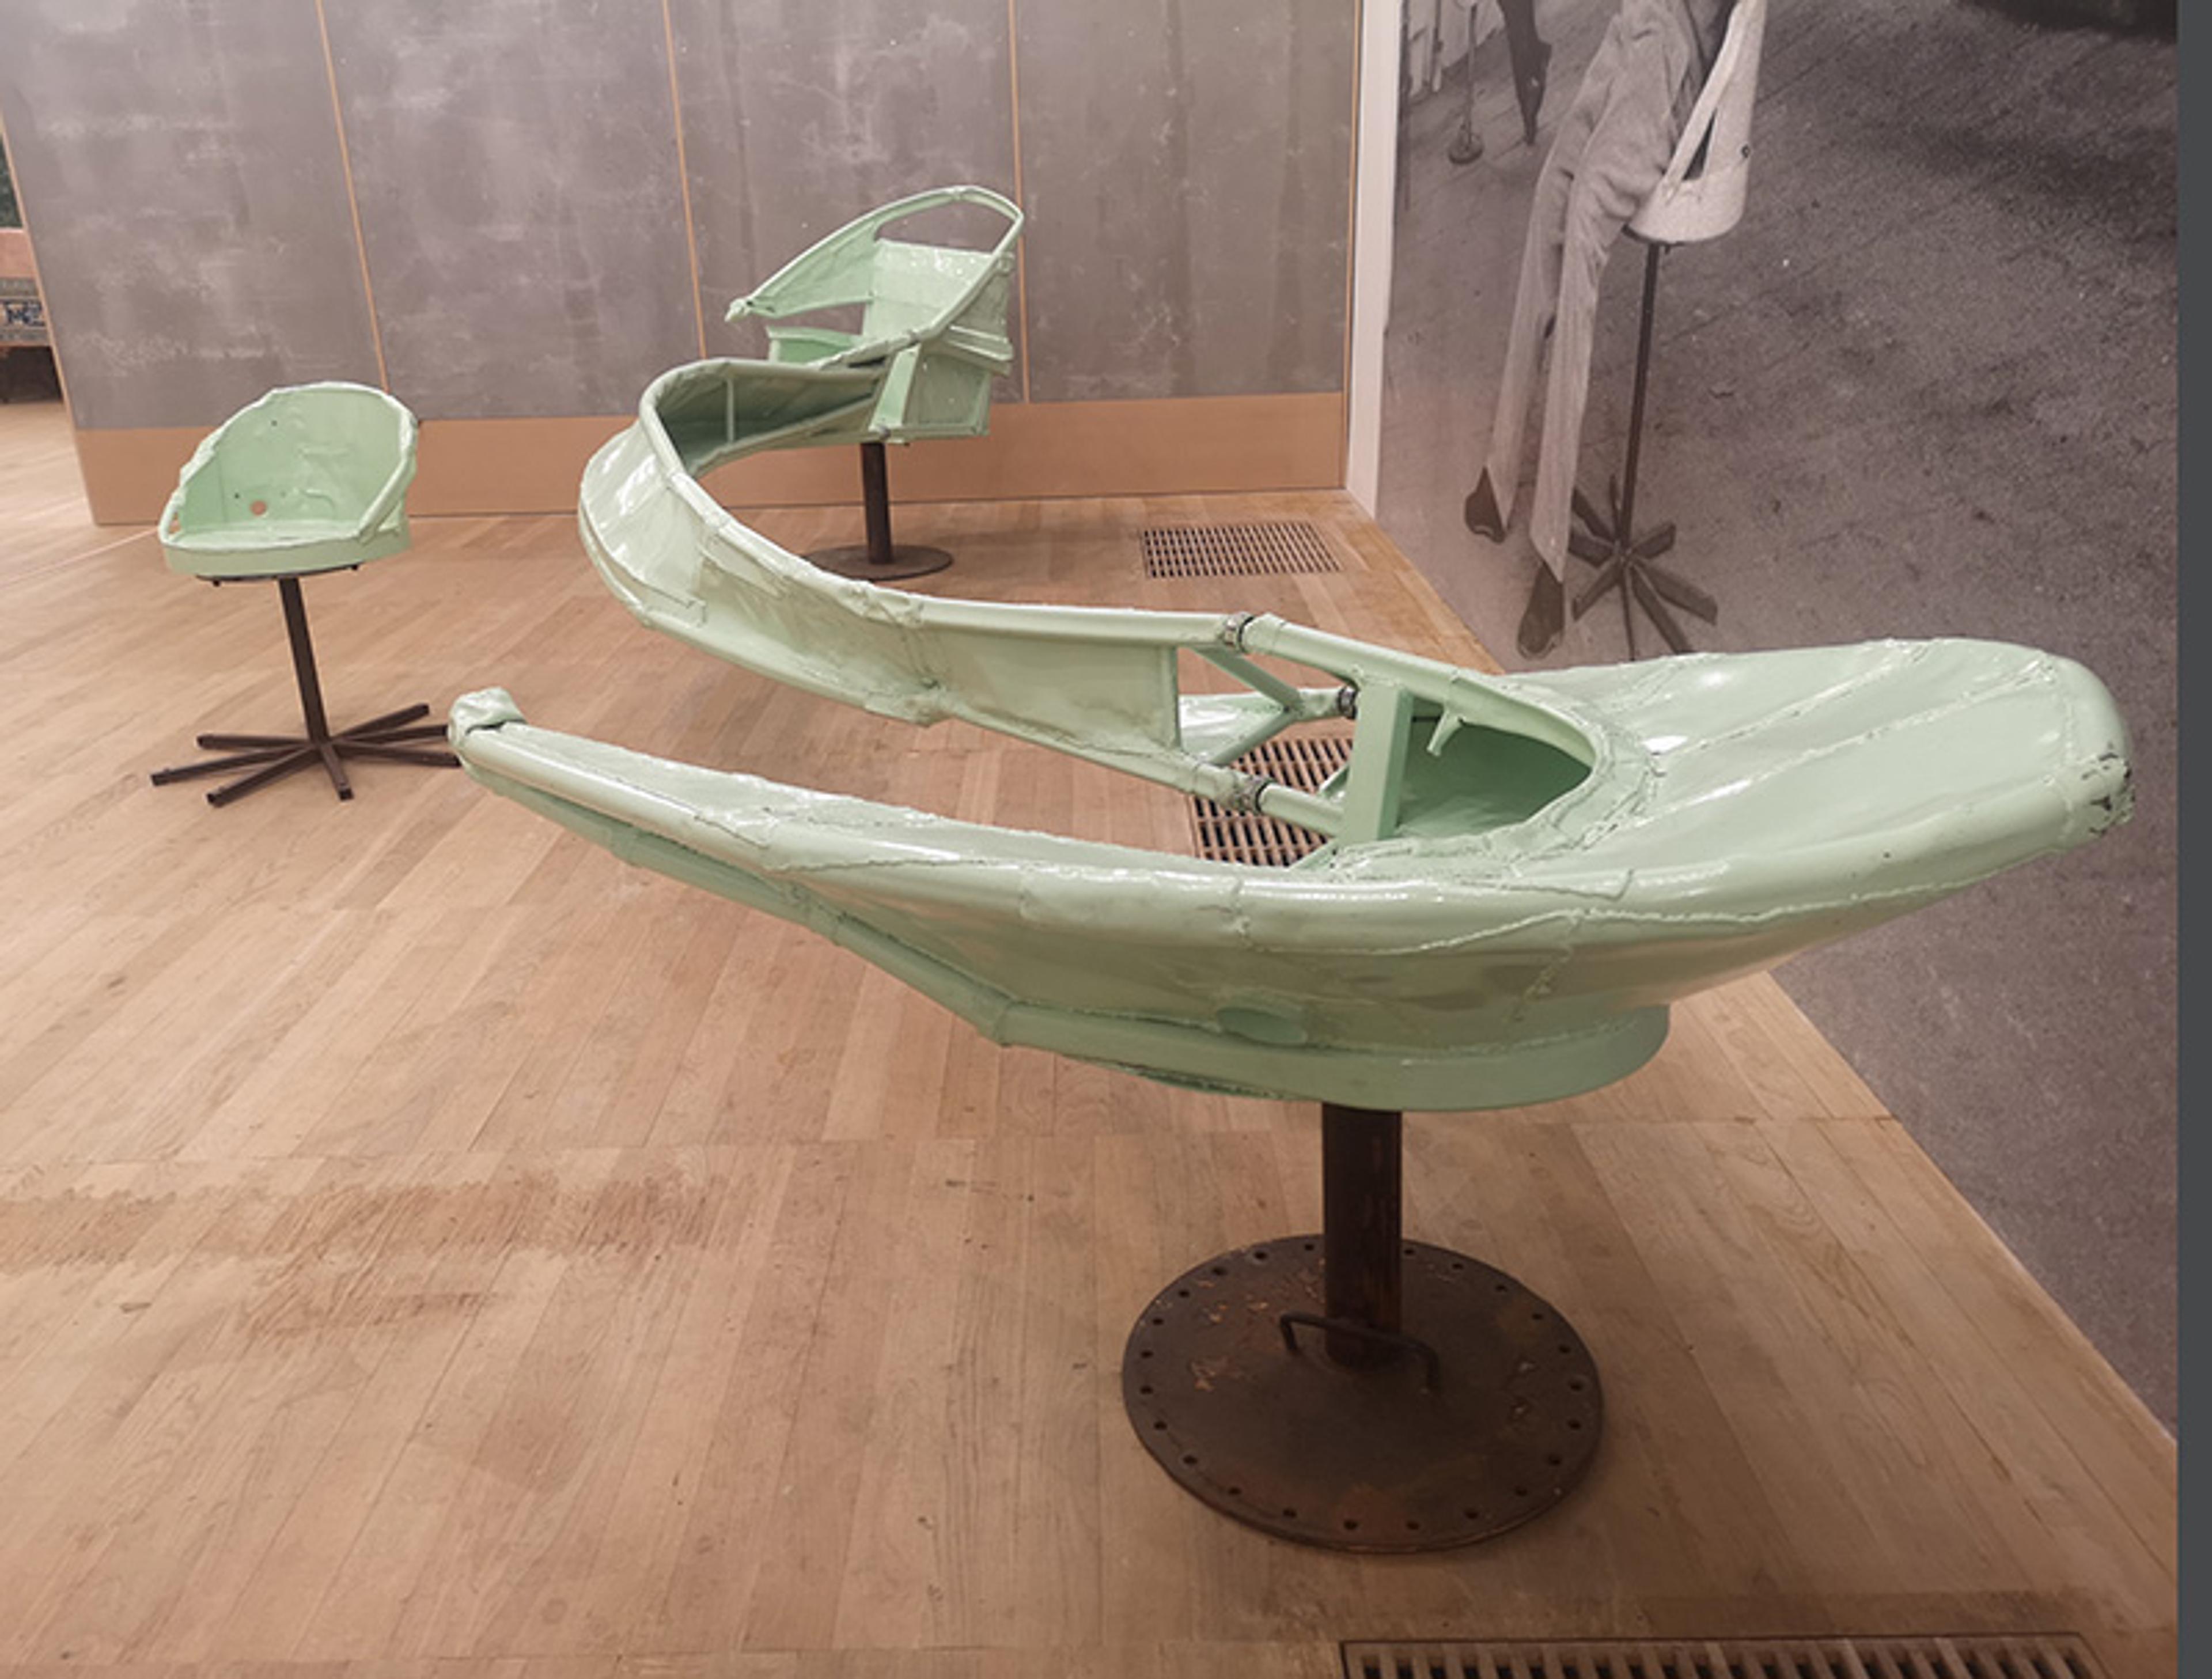 Three green, industrial metal structures mounted on stands are displayed on a wooden floor. The structures resemble abstract, aerodynamic forms. In the background, there is a monochrome mural of a person.